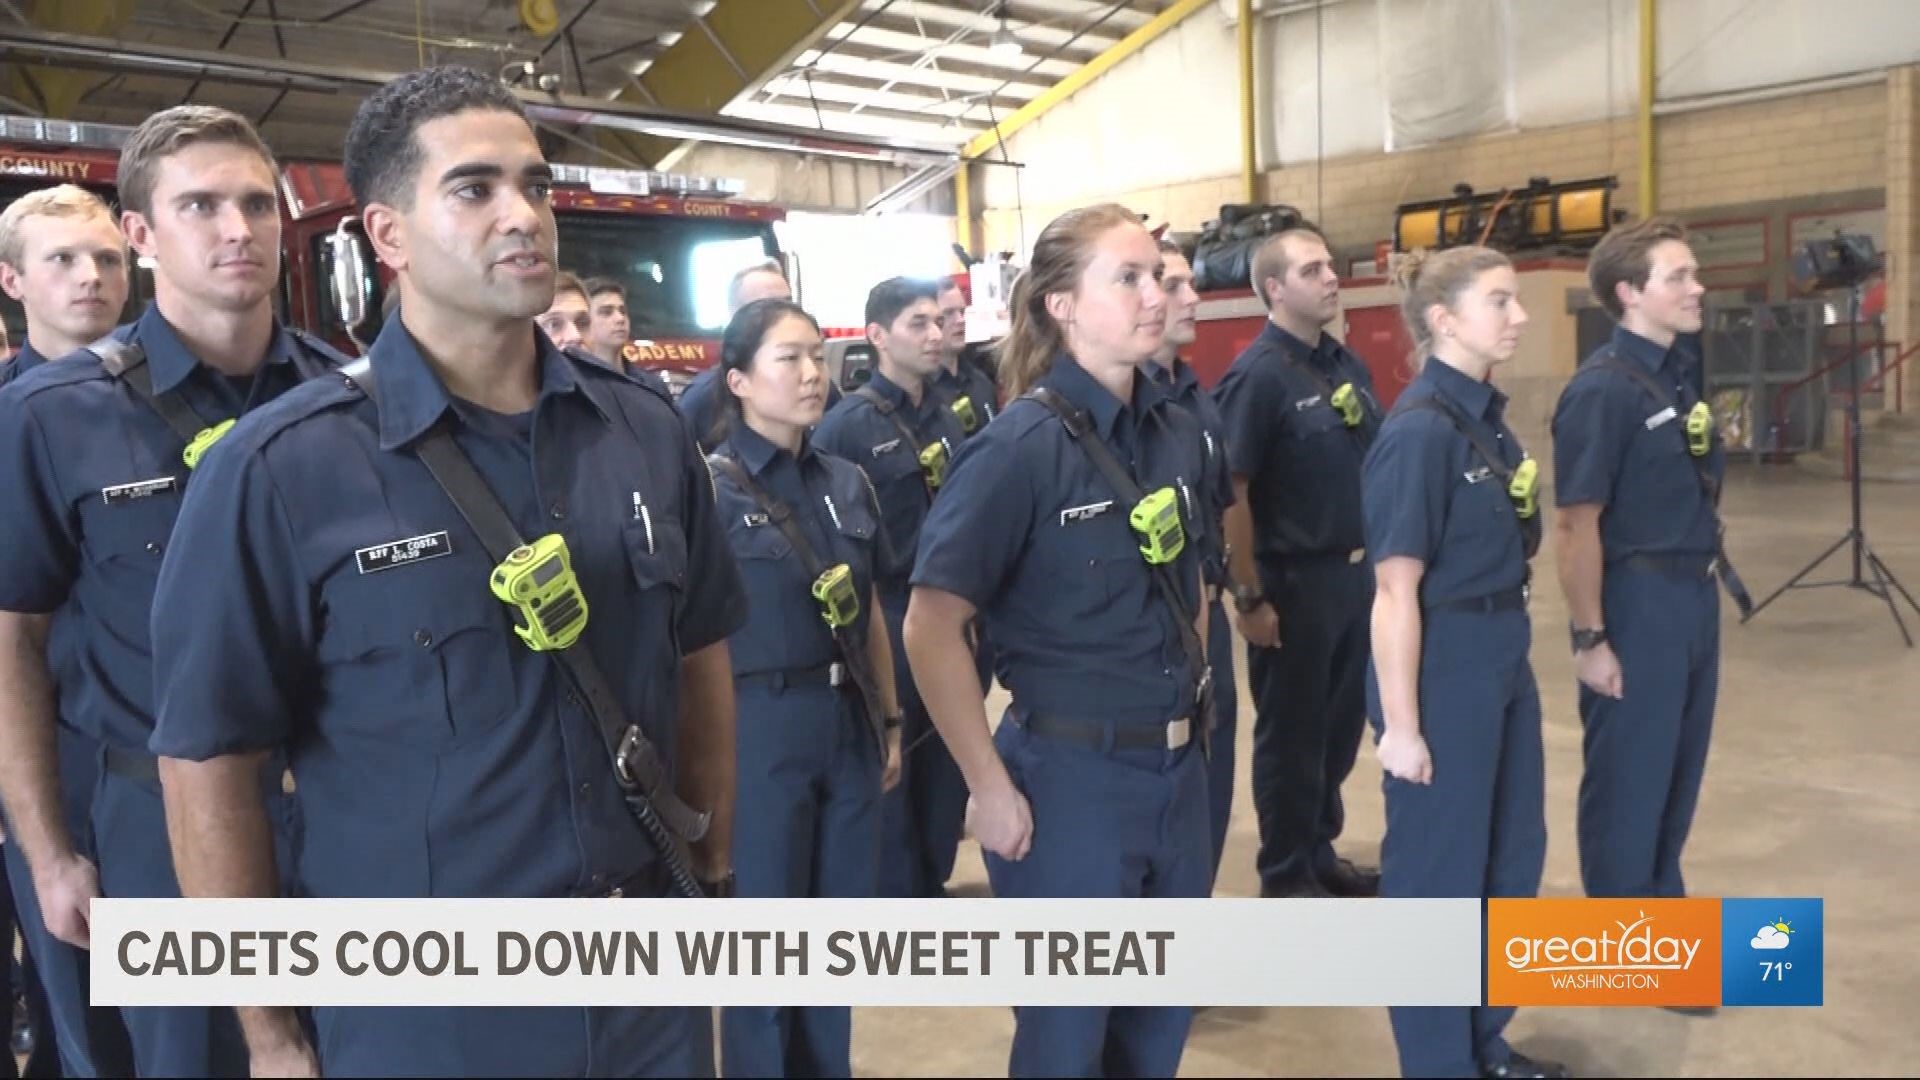 Apple Federal Credit Union shares a sweet treat with the cadets from Fairfax Fire and Rescue. This segment was sponsored by Apple Federal Credit Union.